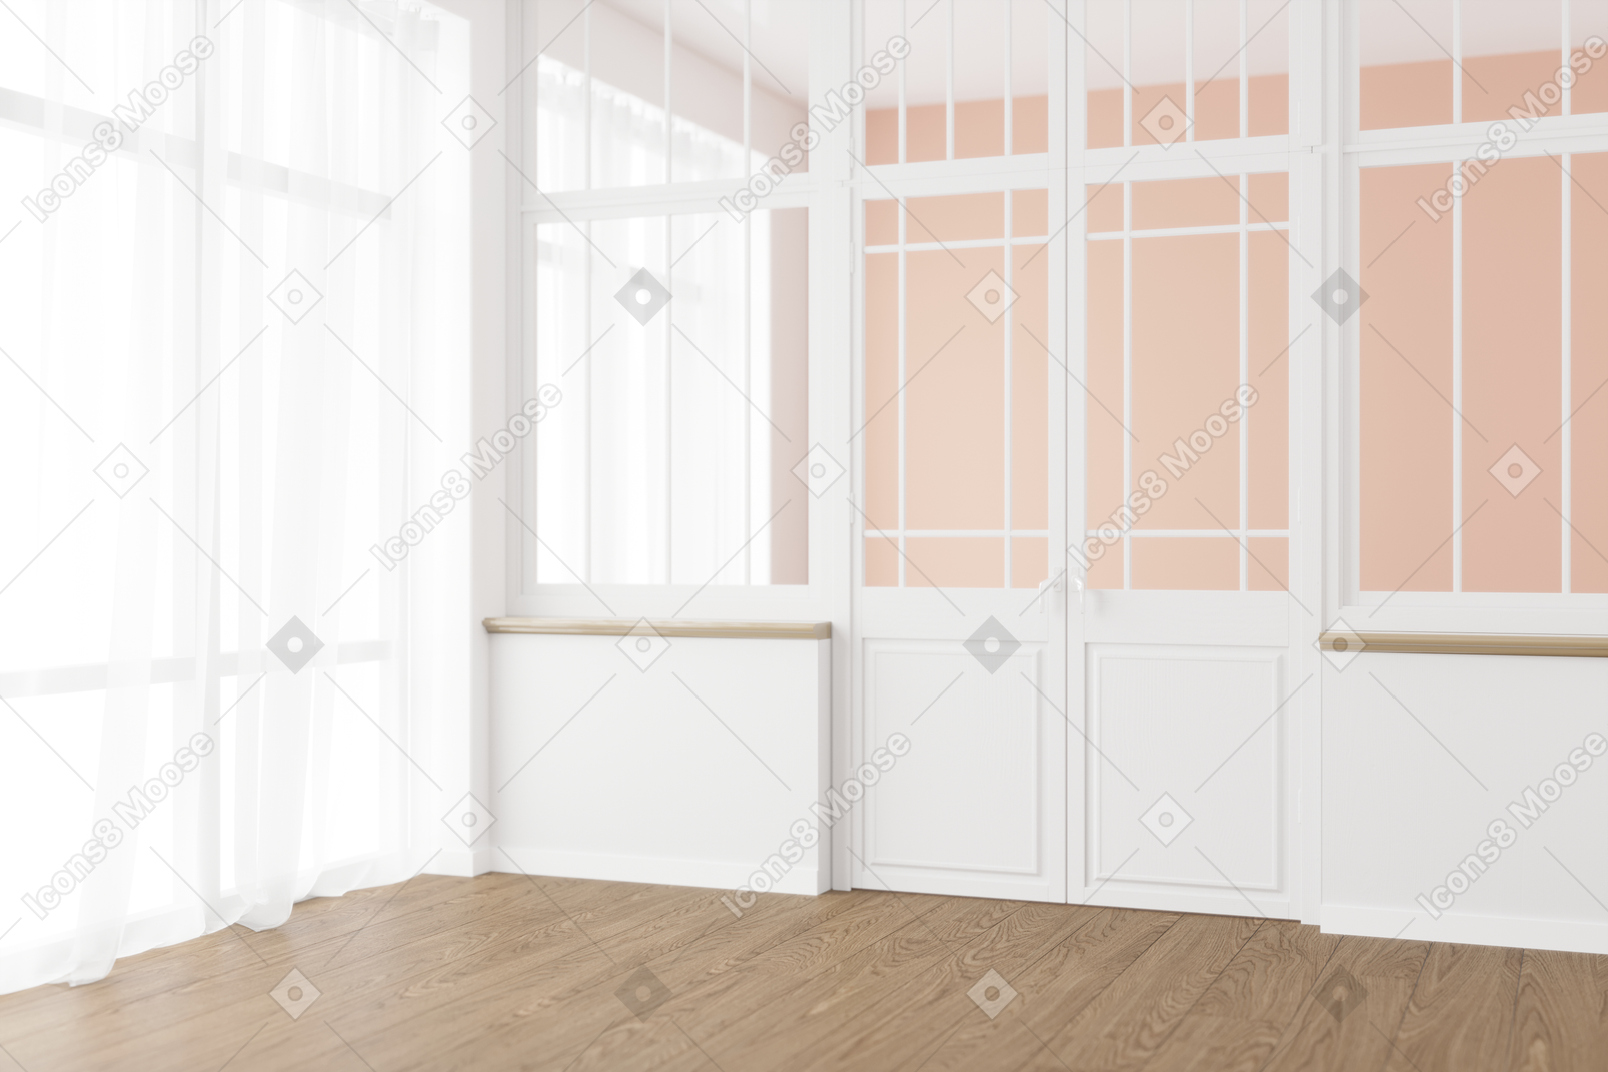 Room with french doors, large windows and sheer curtains